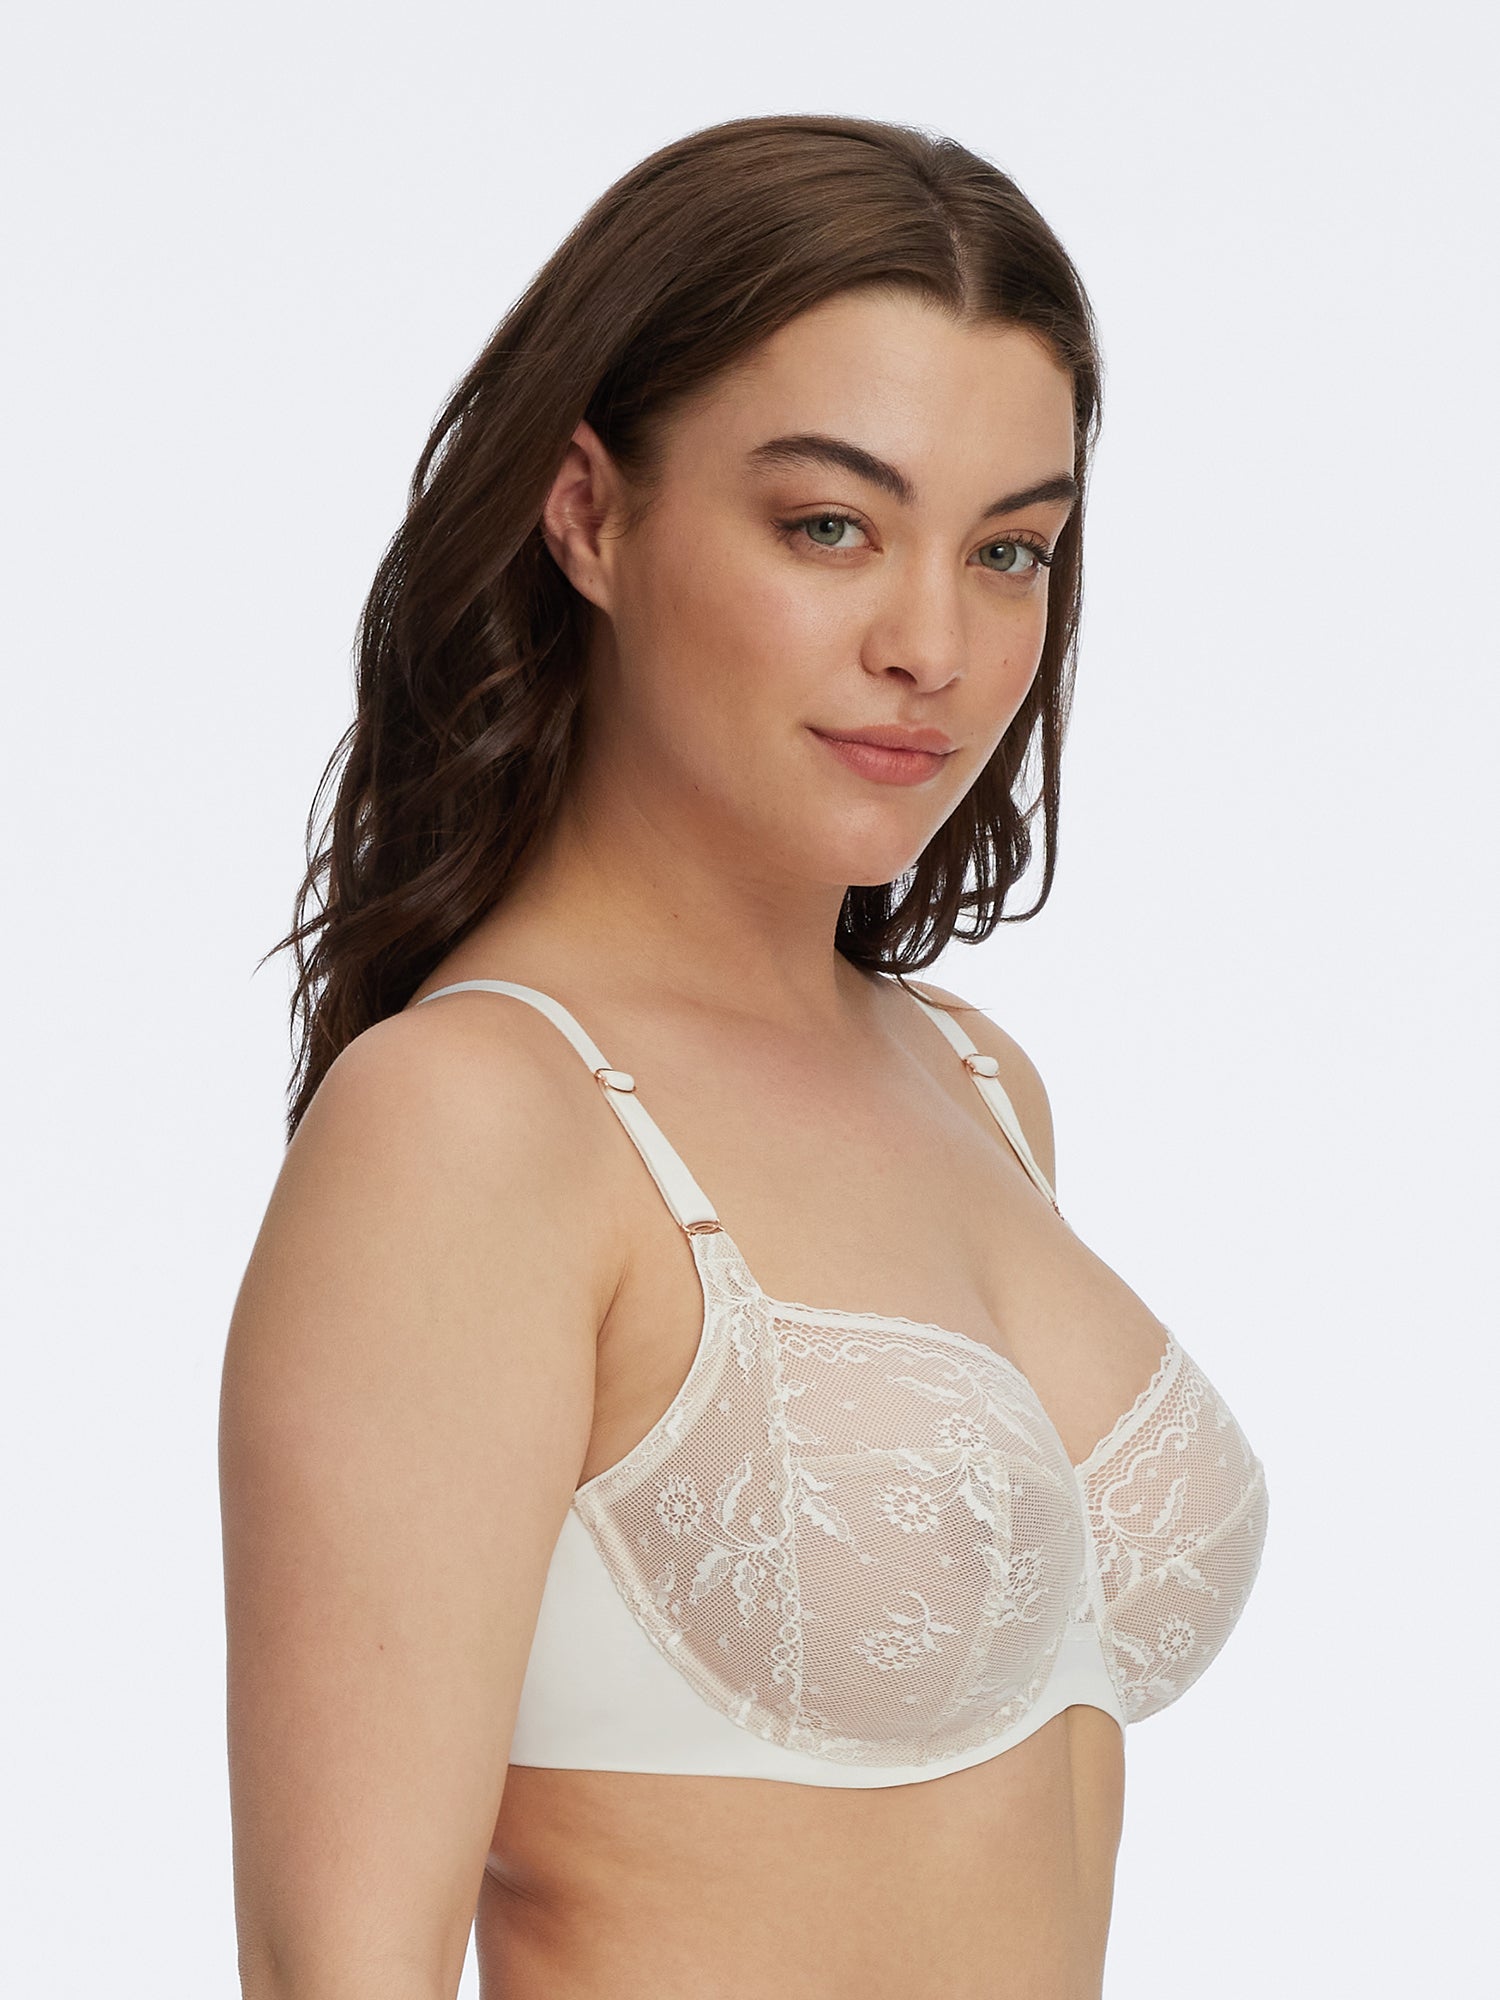 Comfortable full cup bra, beautiful lace, wide shoulder straps, B